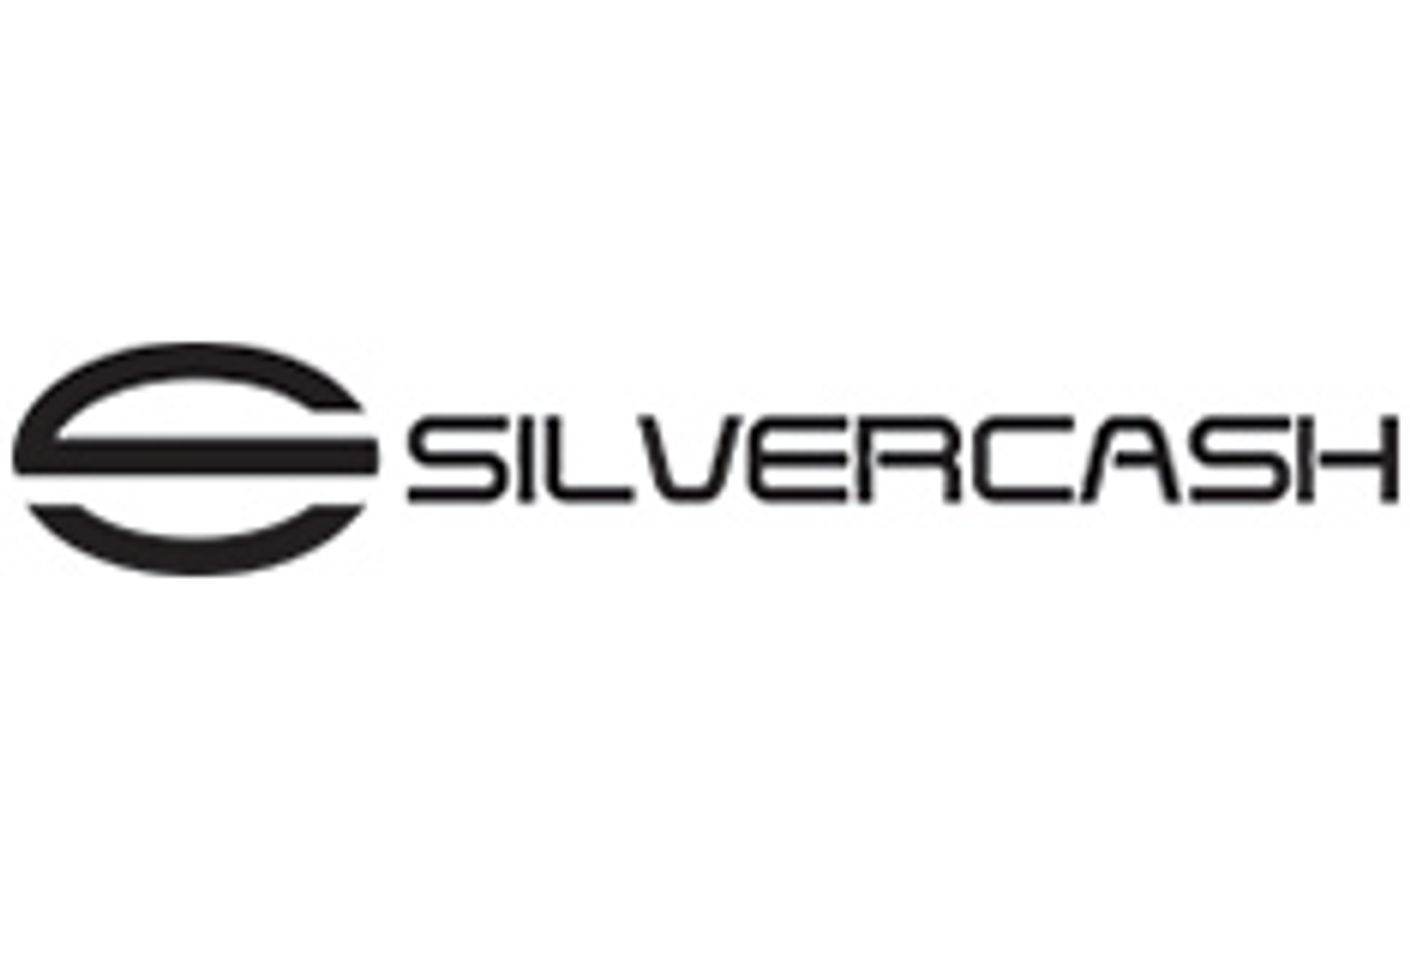 Silvercash Extends Bonus Payouts for IndiaUncovered.com